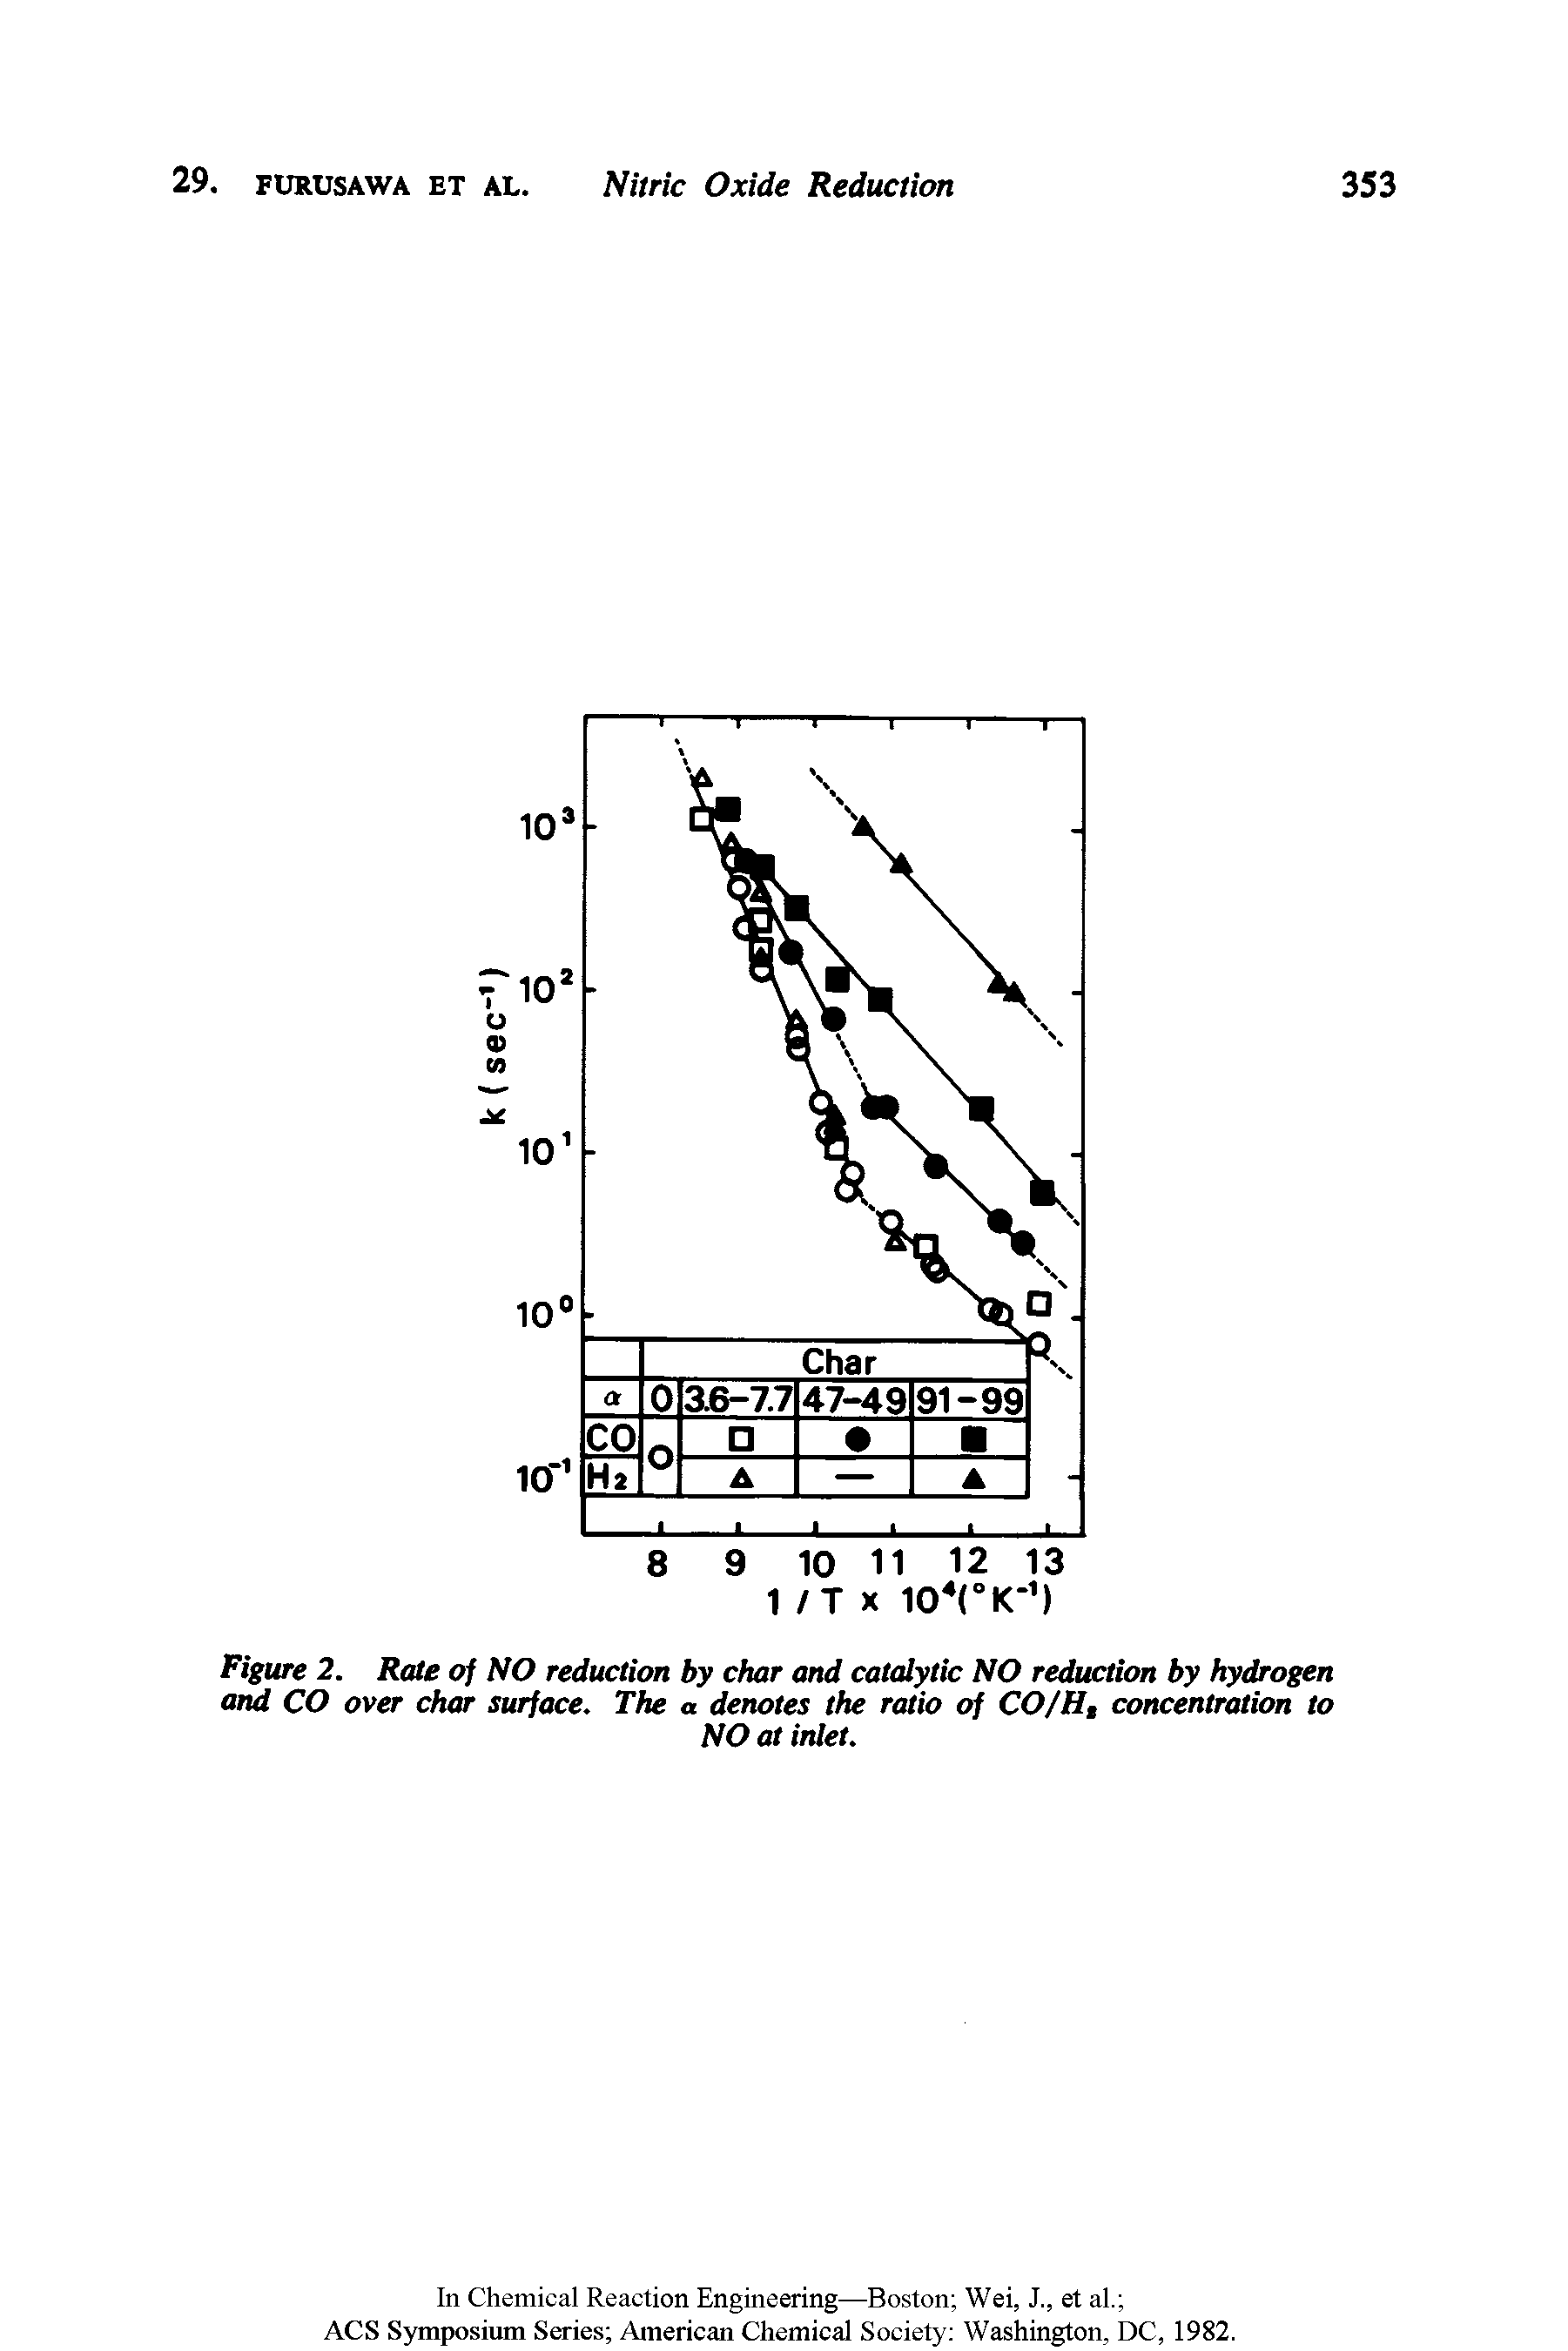 Figure 2. Rate of NO reduction by char and catalytic NO reduction by hydrogen and CO over char surface. The a denotes the ratio of CO/H, concentration to...